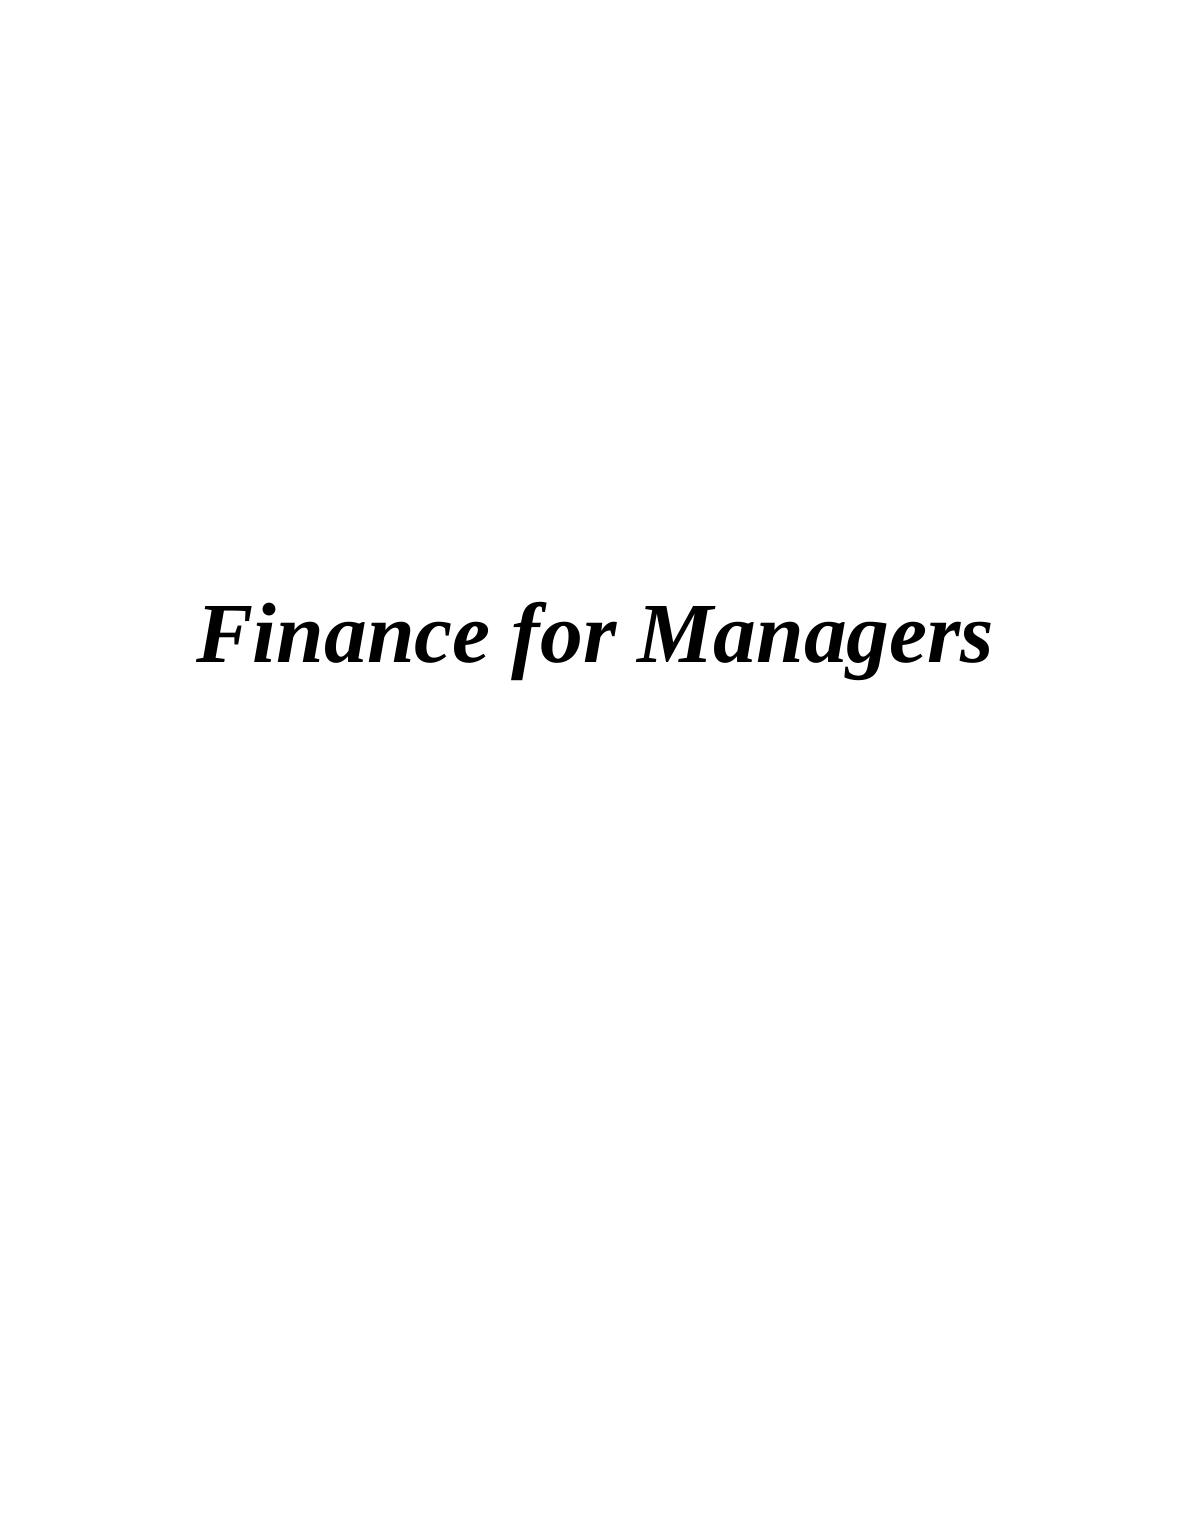 Finance for Managers: Objectives and needs of financial records_1